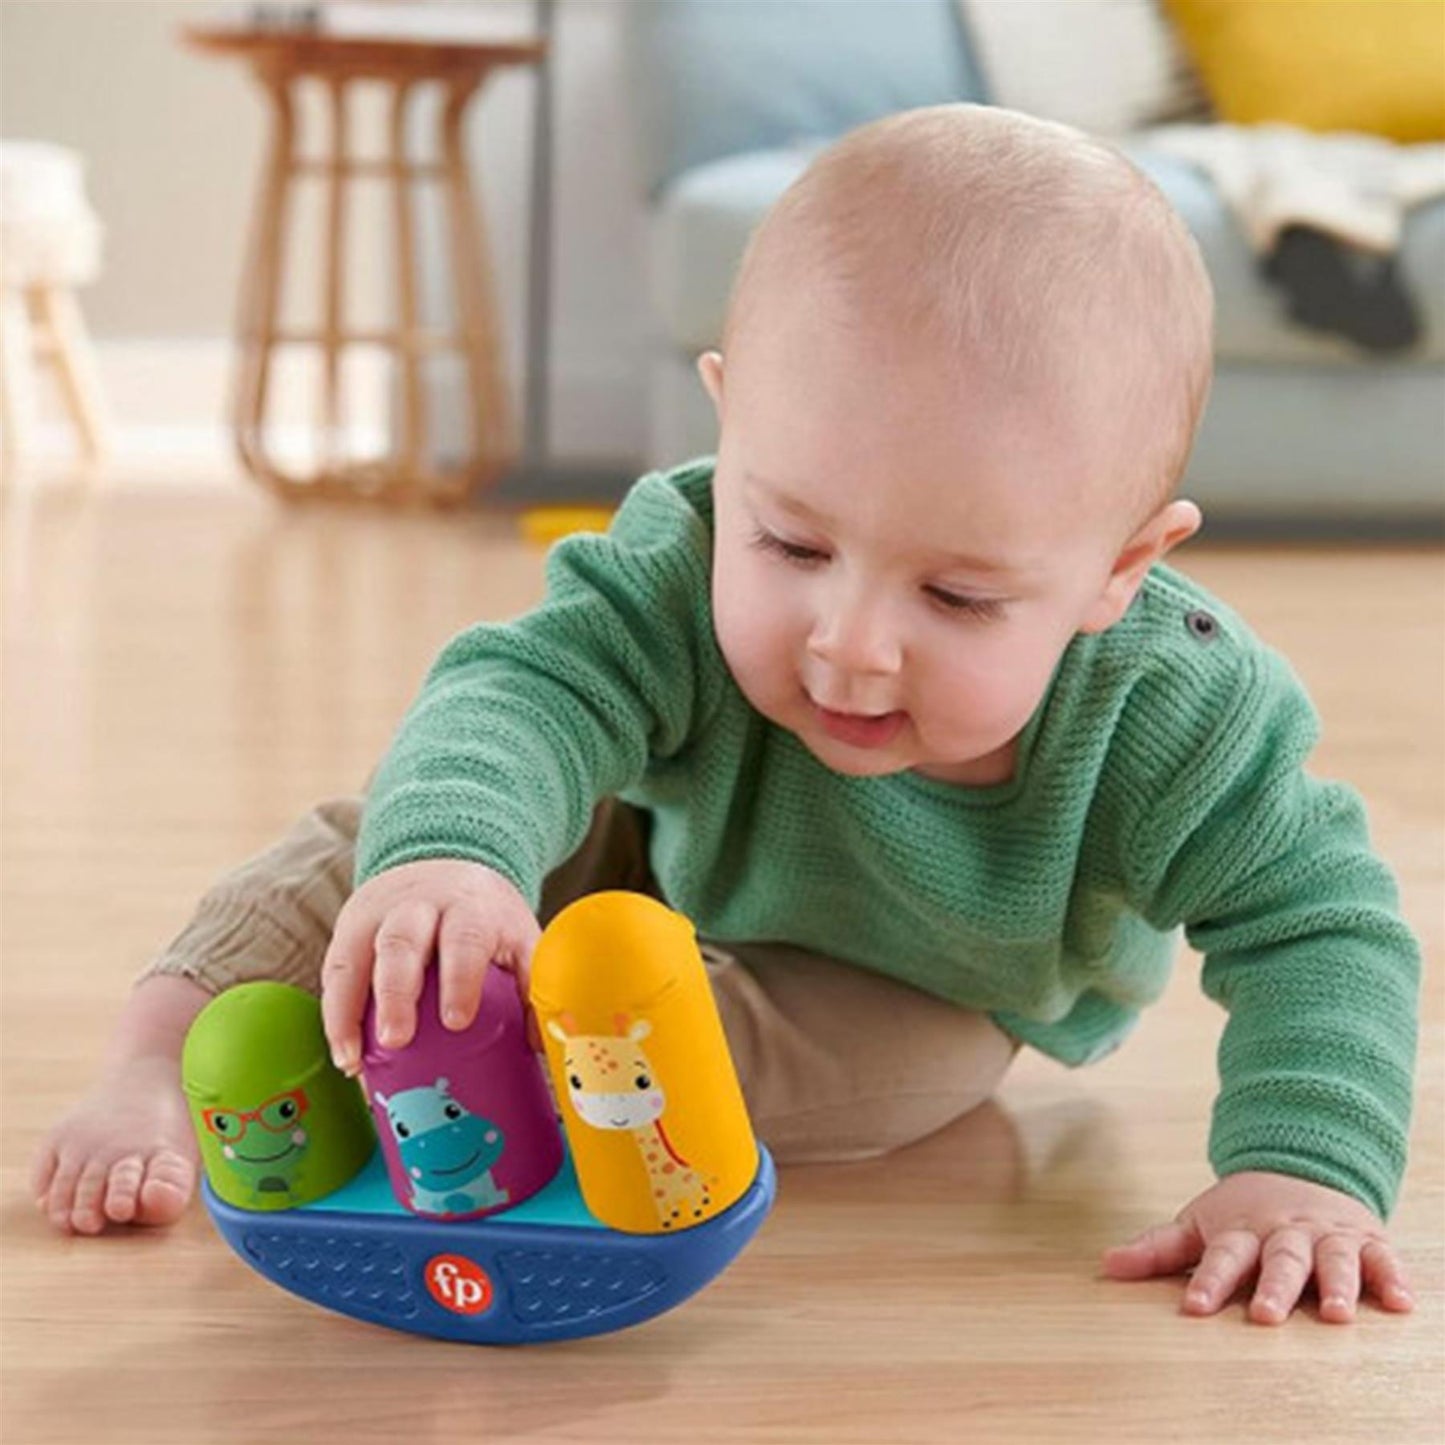 Fisher Price Hello Moves Play Kit, Baby Activity Toys, 9m + by Fisher Price - UKBuyZone